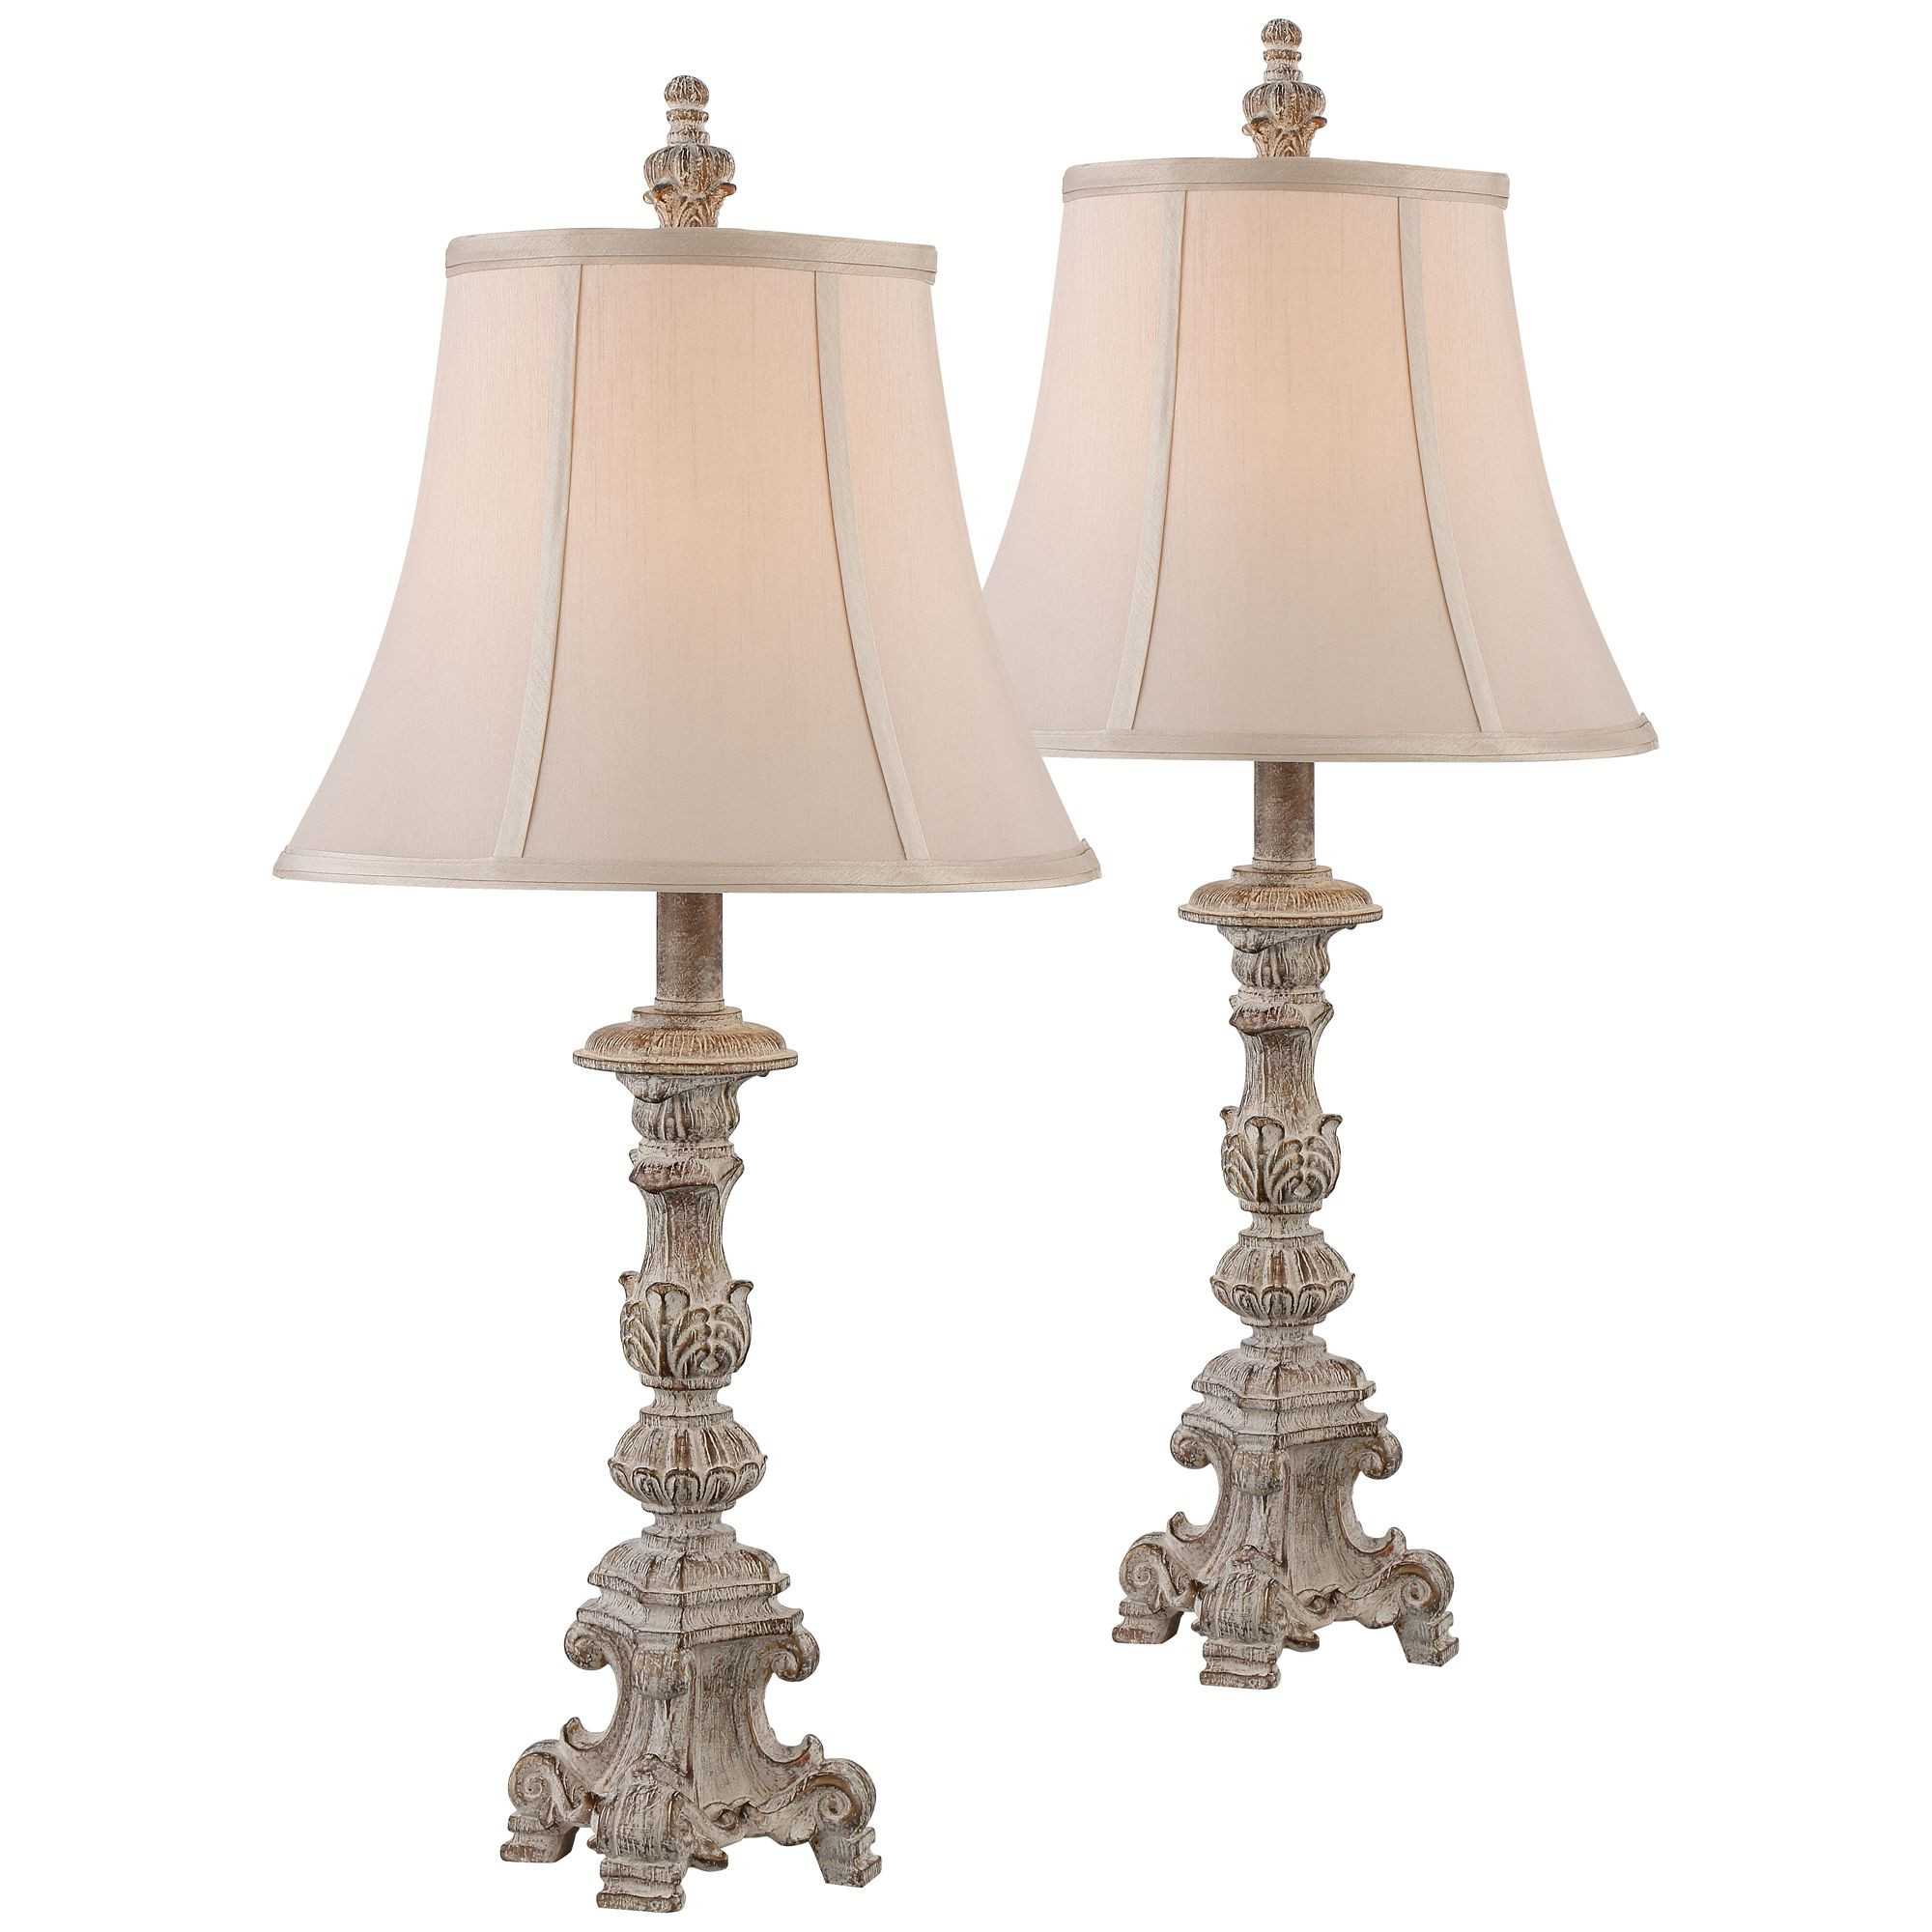 Shabby Chic Bedroom Lamps
 Regency Hill Shabby Chic Table Lamps Set of 2 White Washed